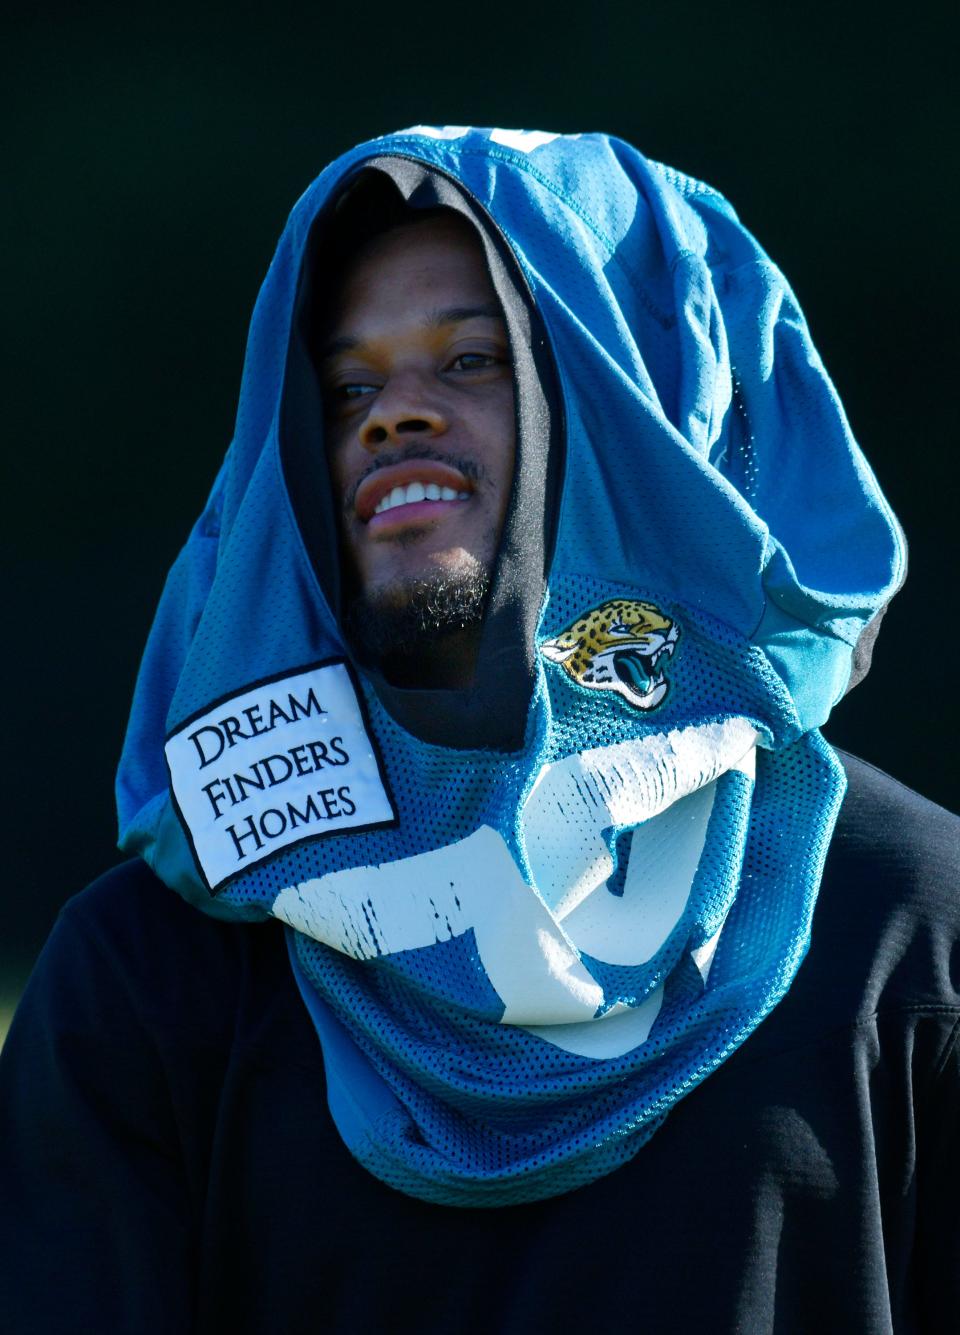 Jacksonville Jaguars wide receiver Jamal Agnew (39) uses his jersey as a sun shade as he gets ready for the start of Wednesday morning's training camp session. The Jacksonville Jaguars held their third day of training camp Wednesday, July 27, 2022, at the Episcopal School of Jacksonville Knight Campus practice fields on Atlantic Blvd. 